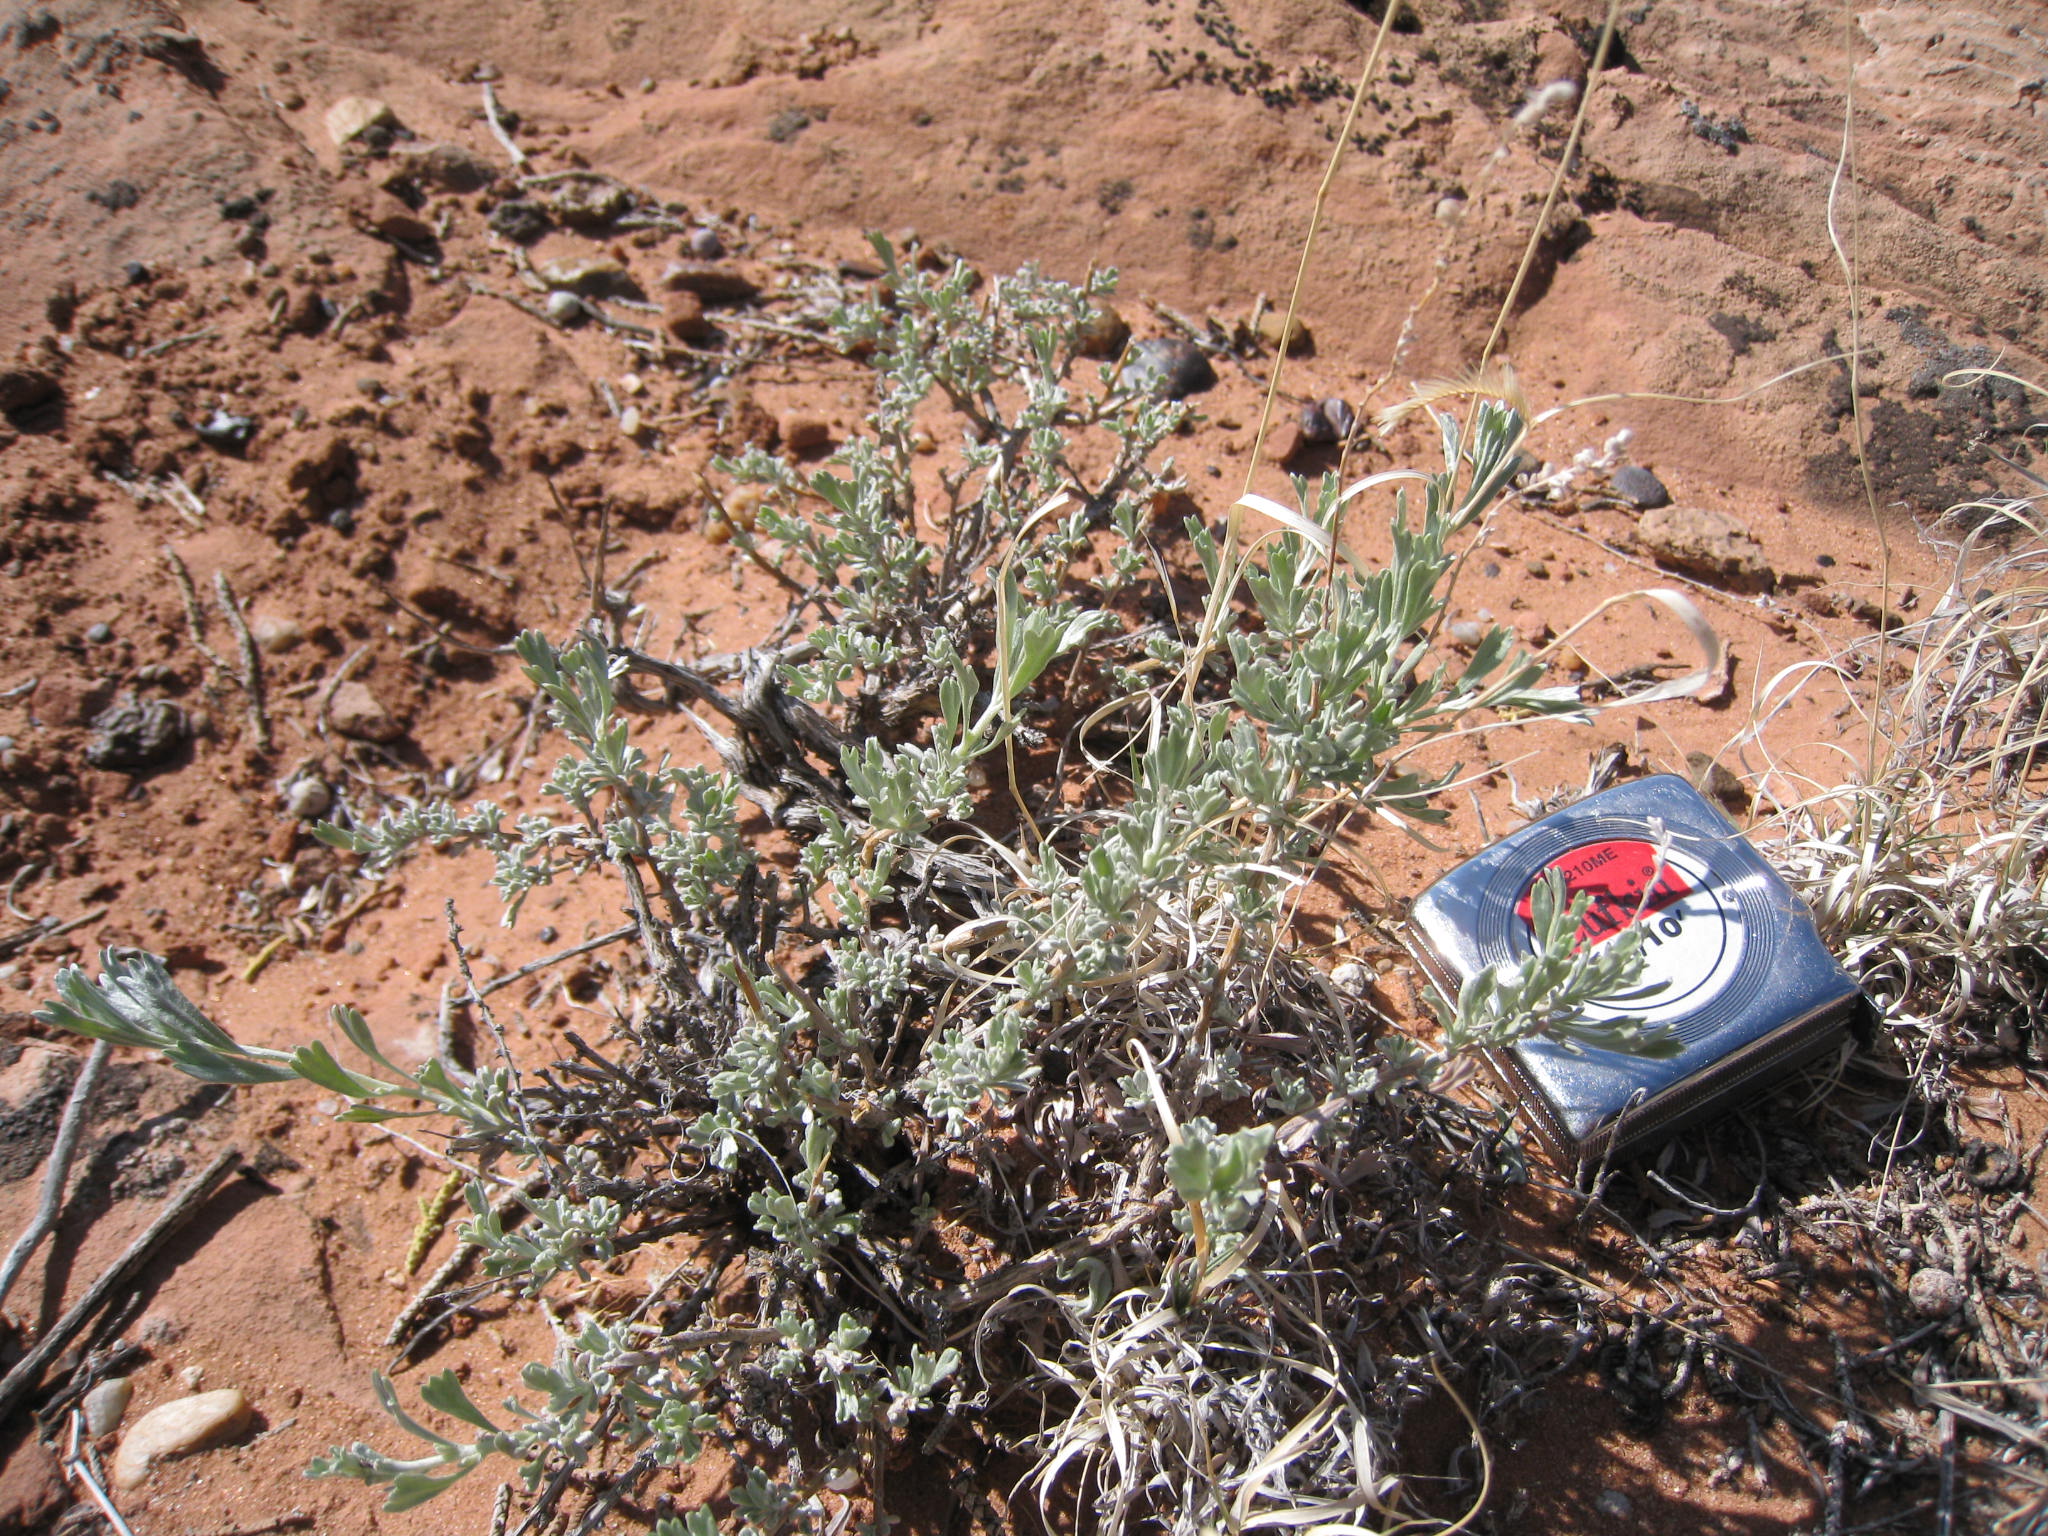 Bigelow sagebrush with tape measure, which show relatively small stature of this dwarf sagebrush